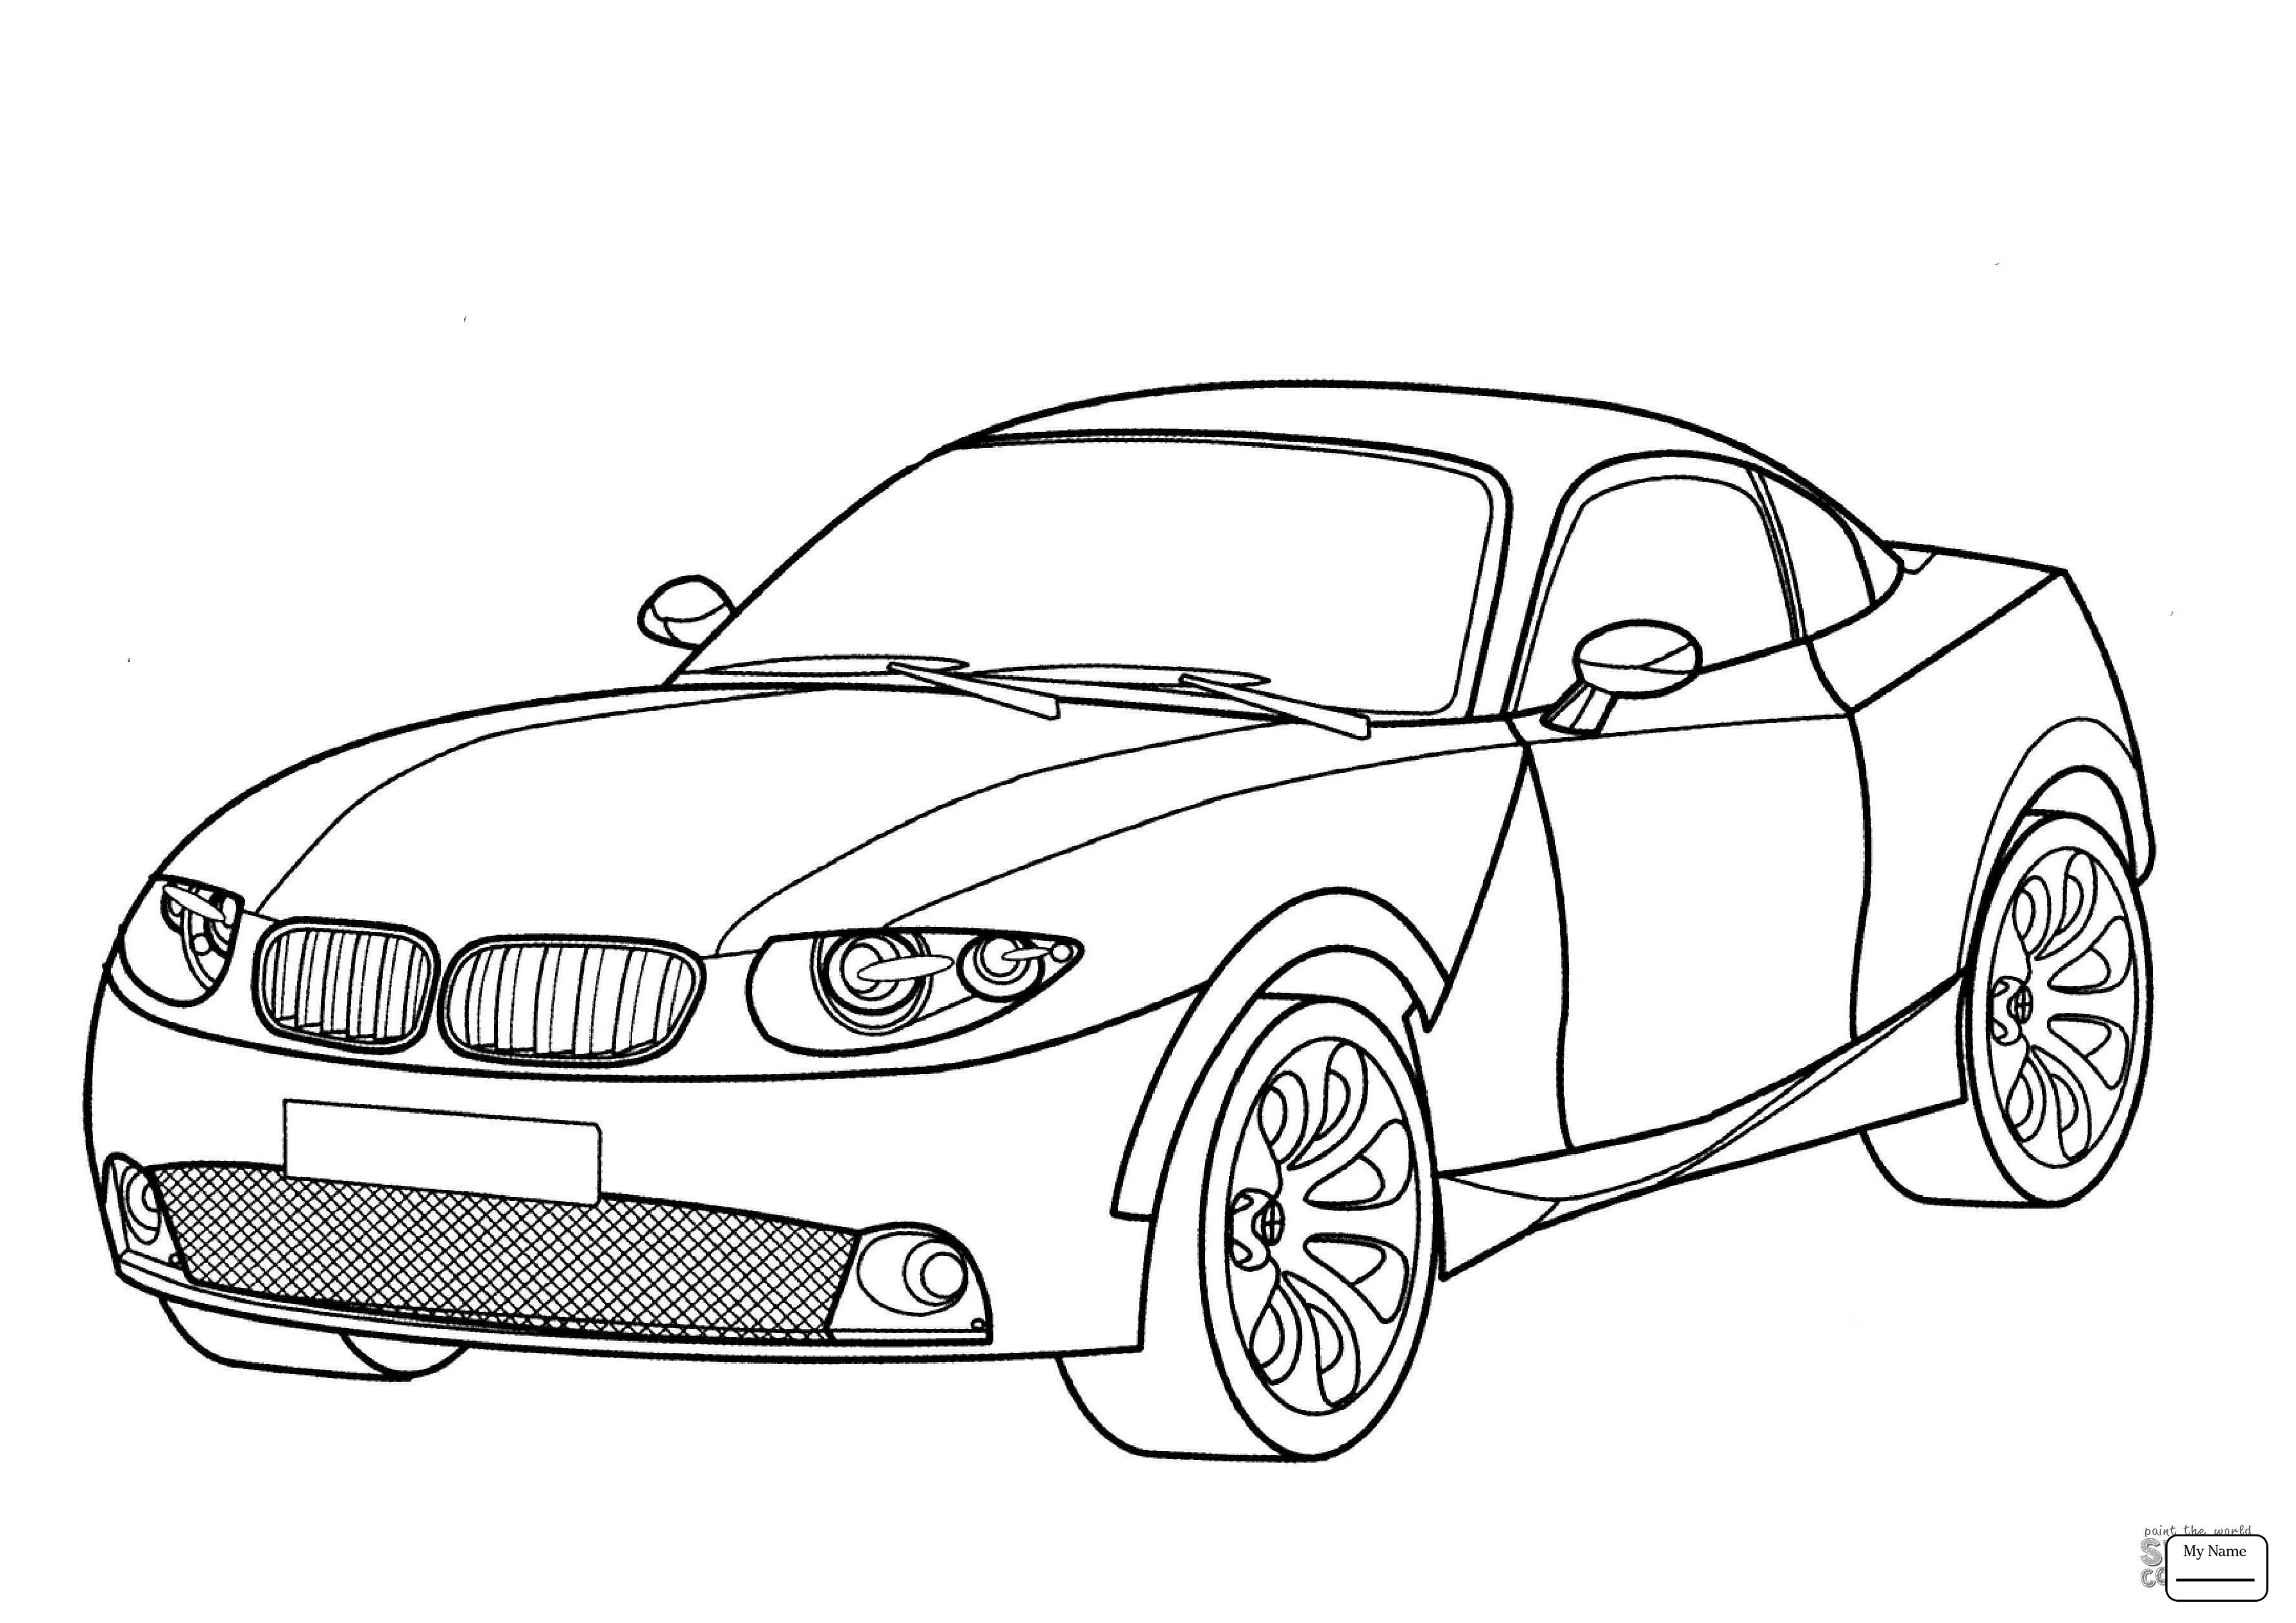 Supercar Coloring Pages at Free printable colorings